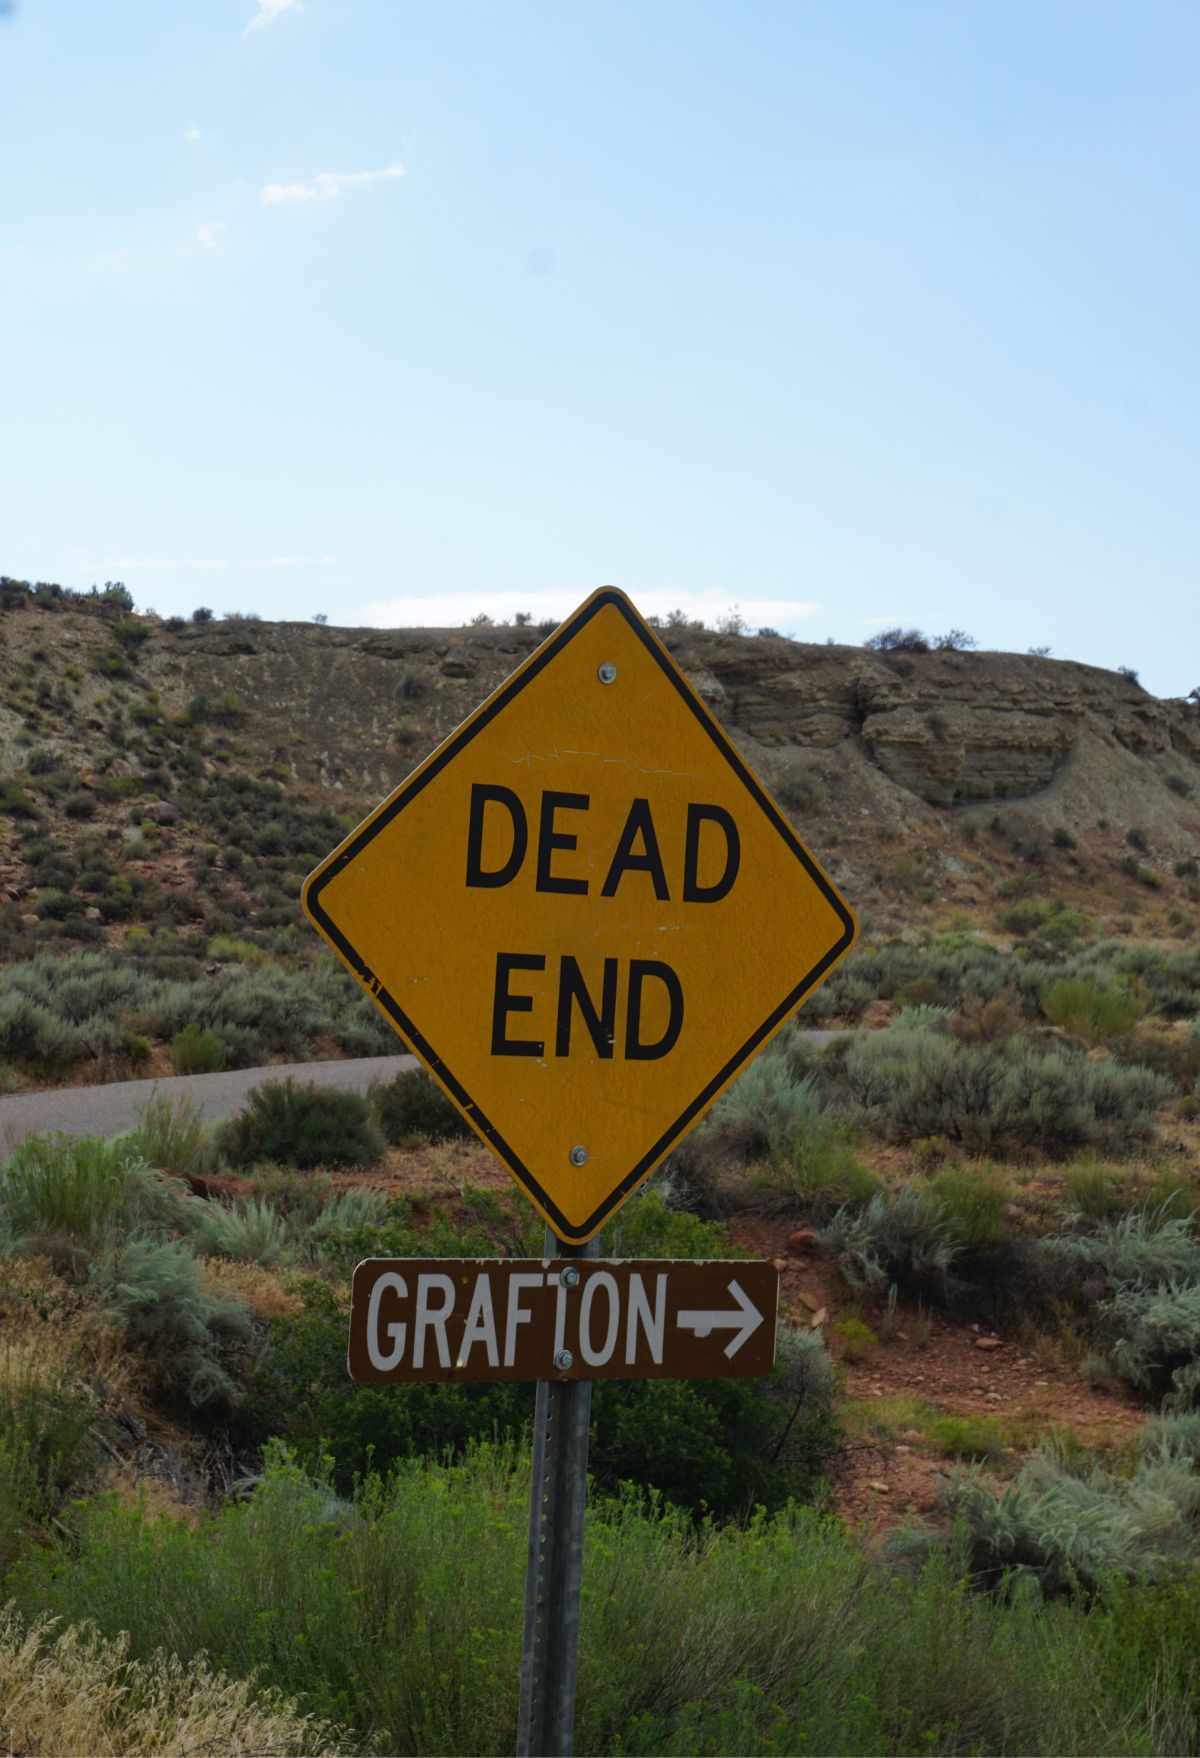 A sign that says dead end and grafton.